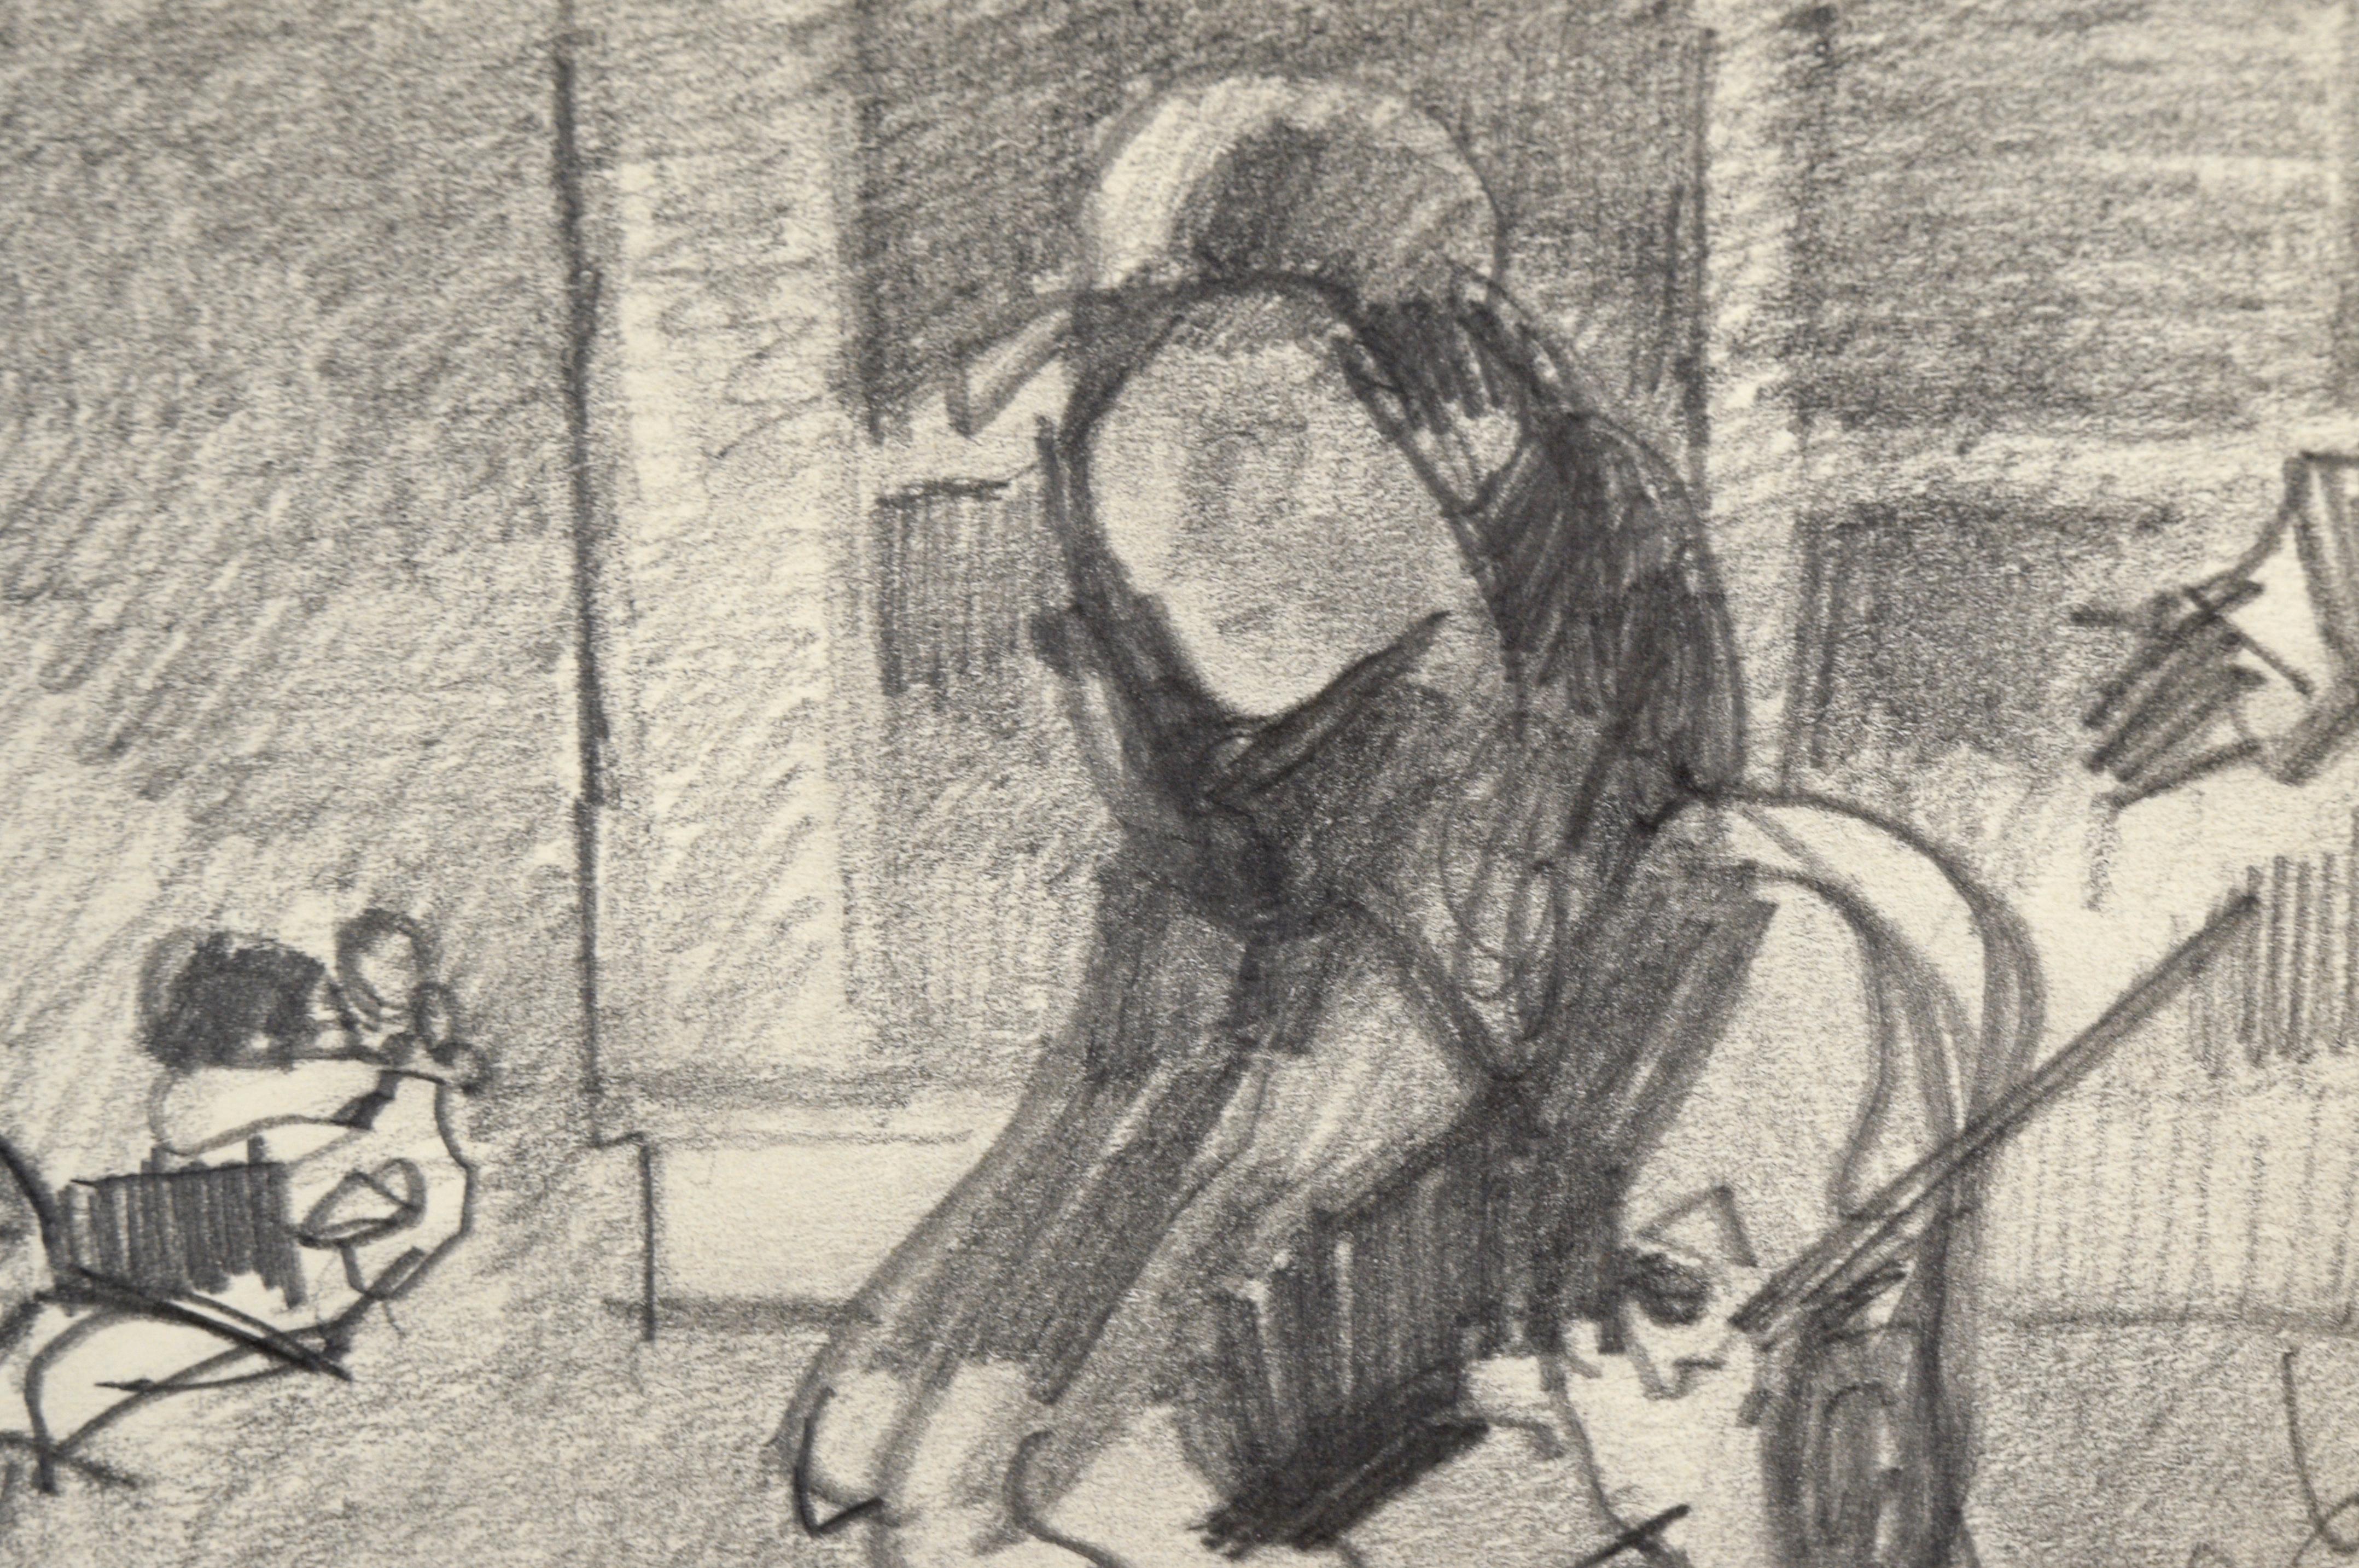 Dynamic live drawing of two musicians by Santa Cruz artist Brian Rounds (b. 1968). Drawn at a house concert in Santa Cruz, California, this piece depicts a musical duo called 